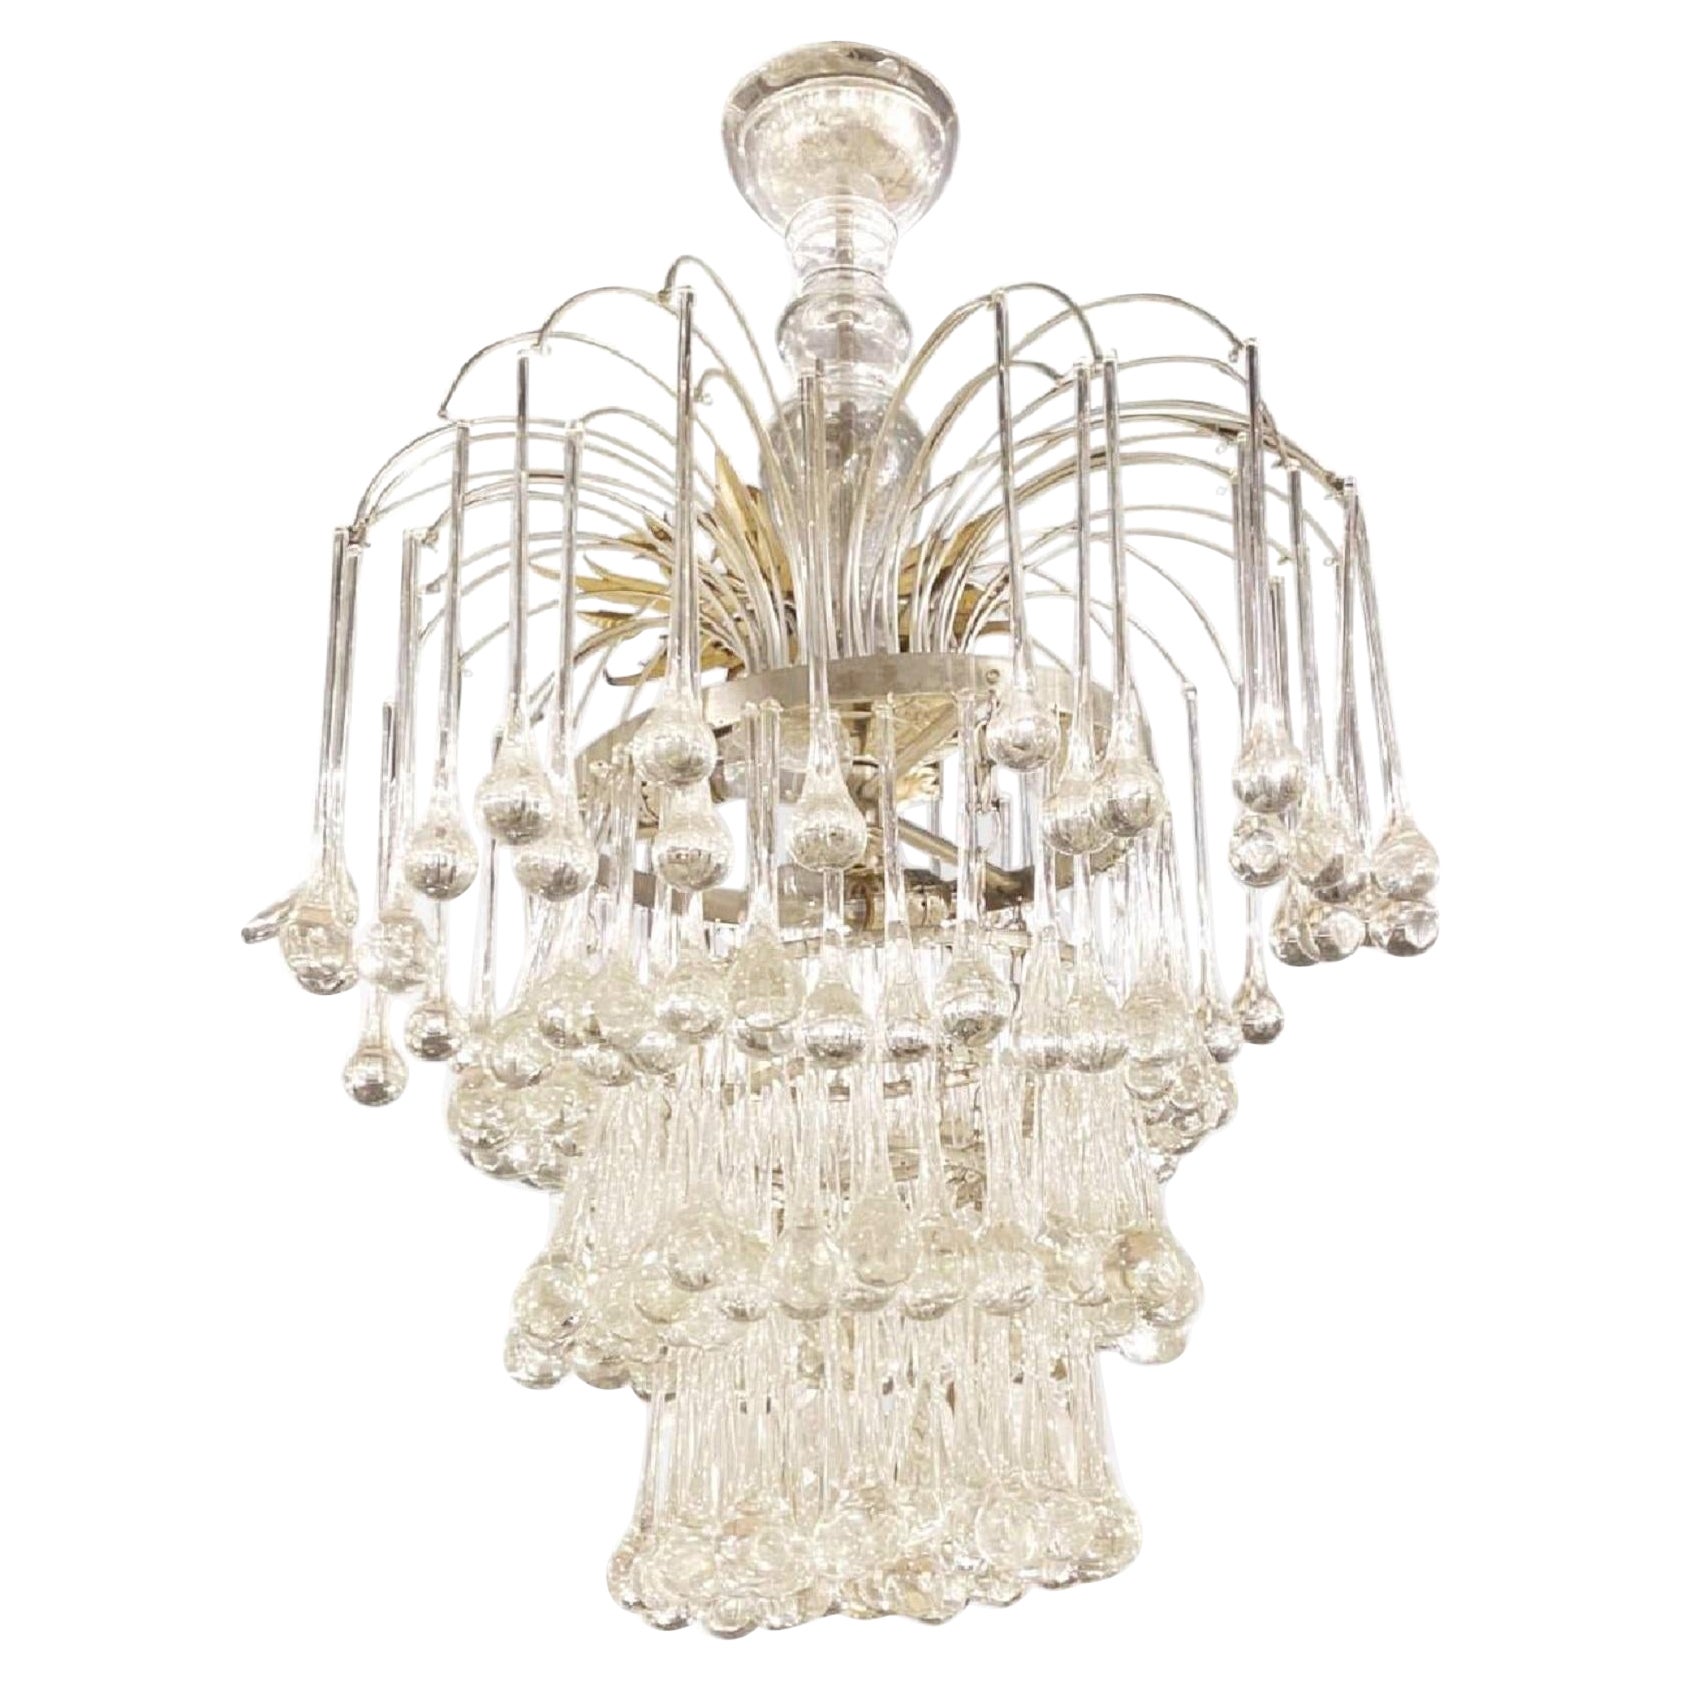 1940’s French Glass Drop Crystals Chandelier For Sale